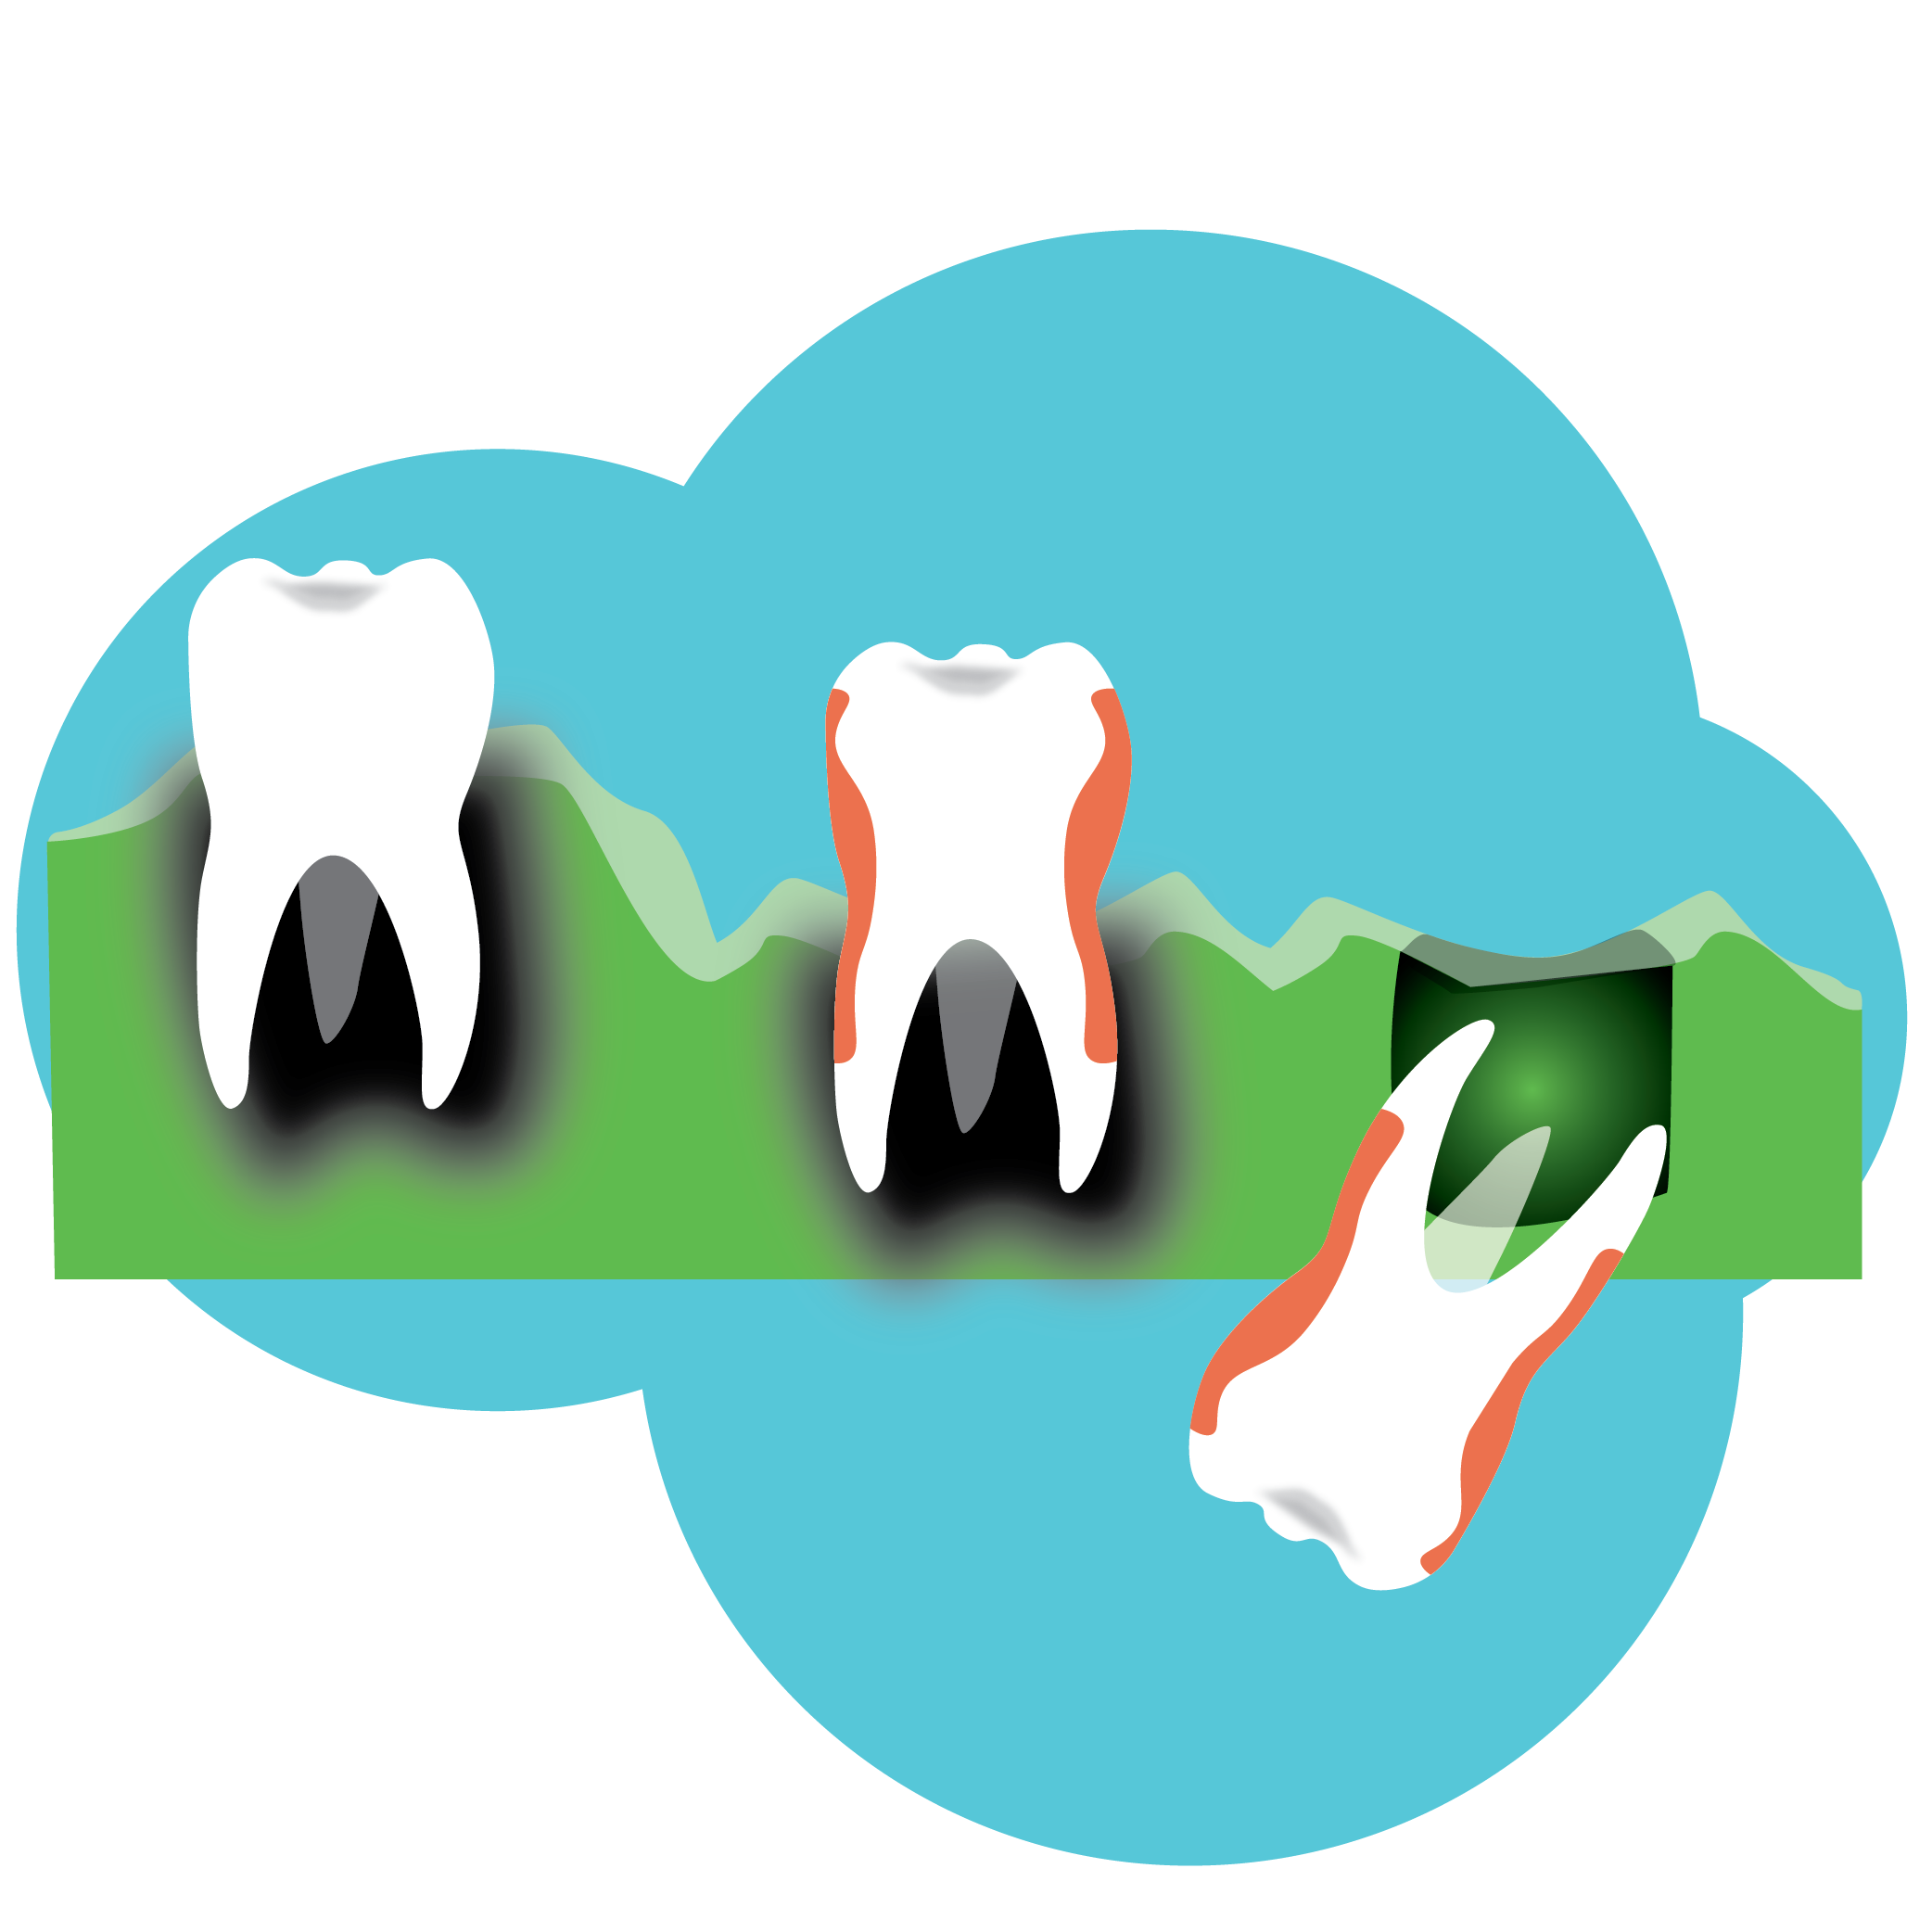 Illustration of 3 teeth next to one another in gums. One teeth is falling out